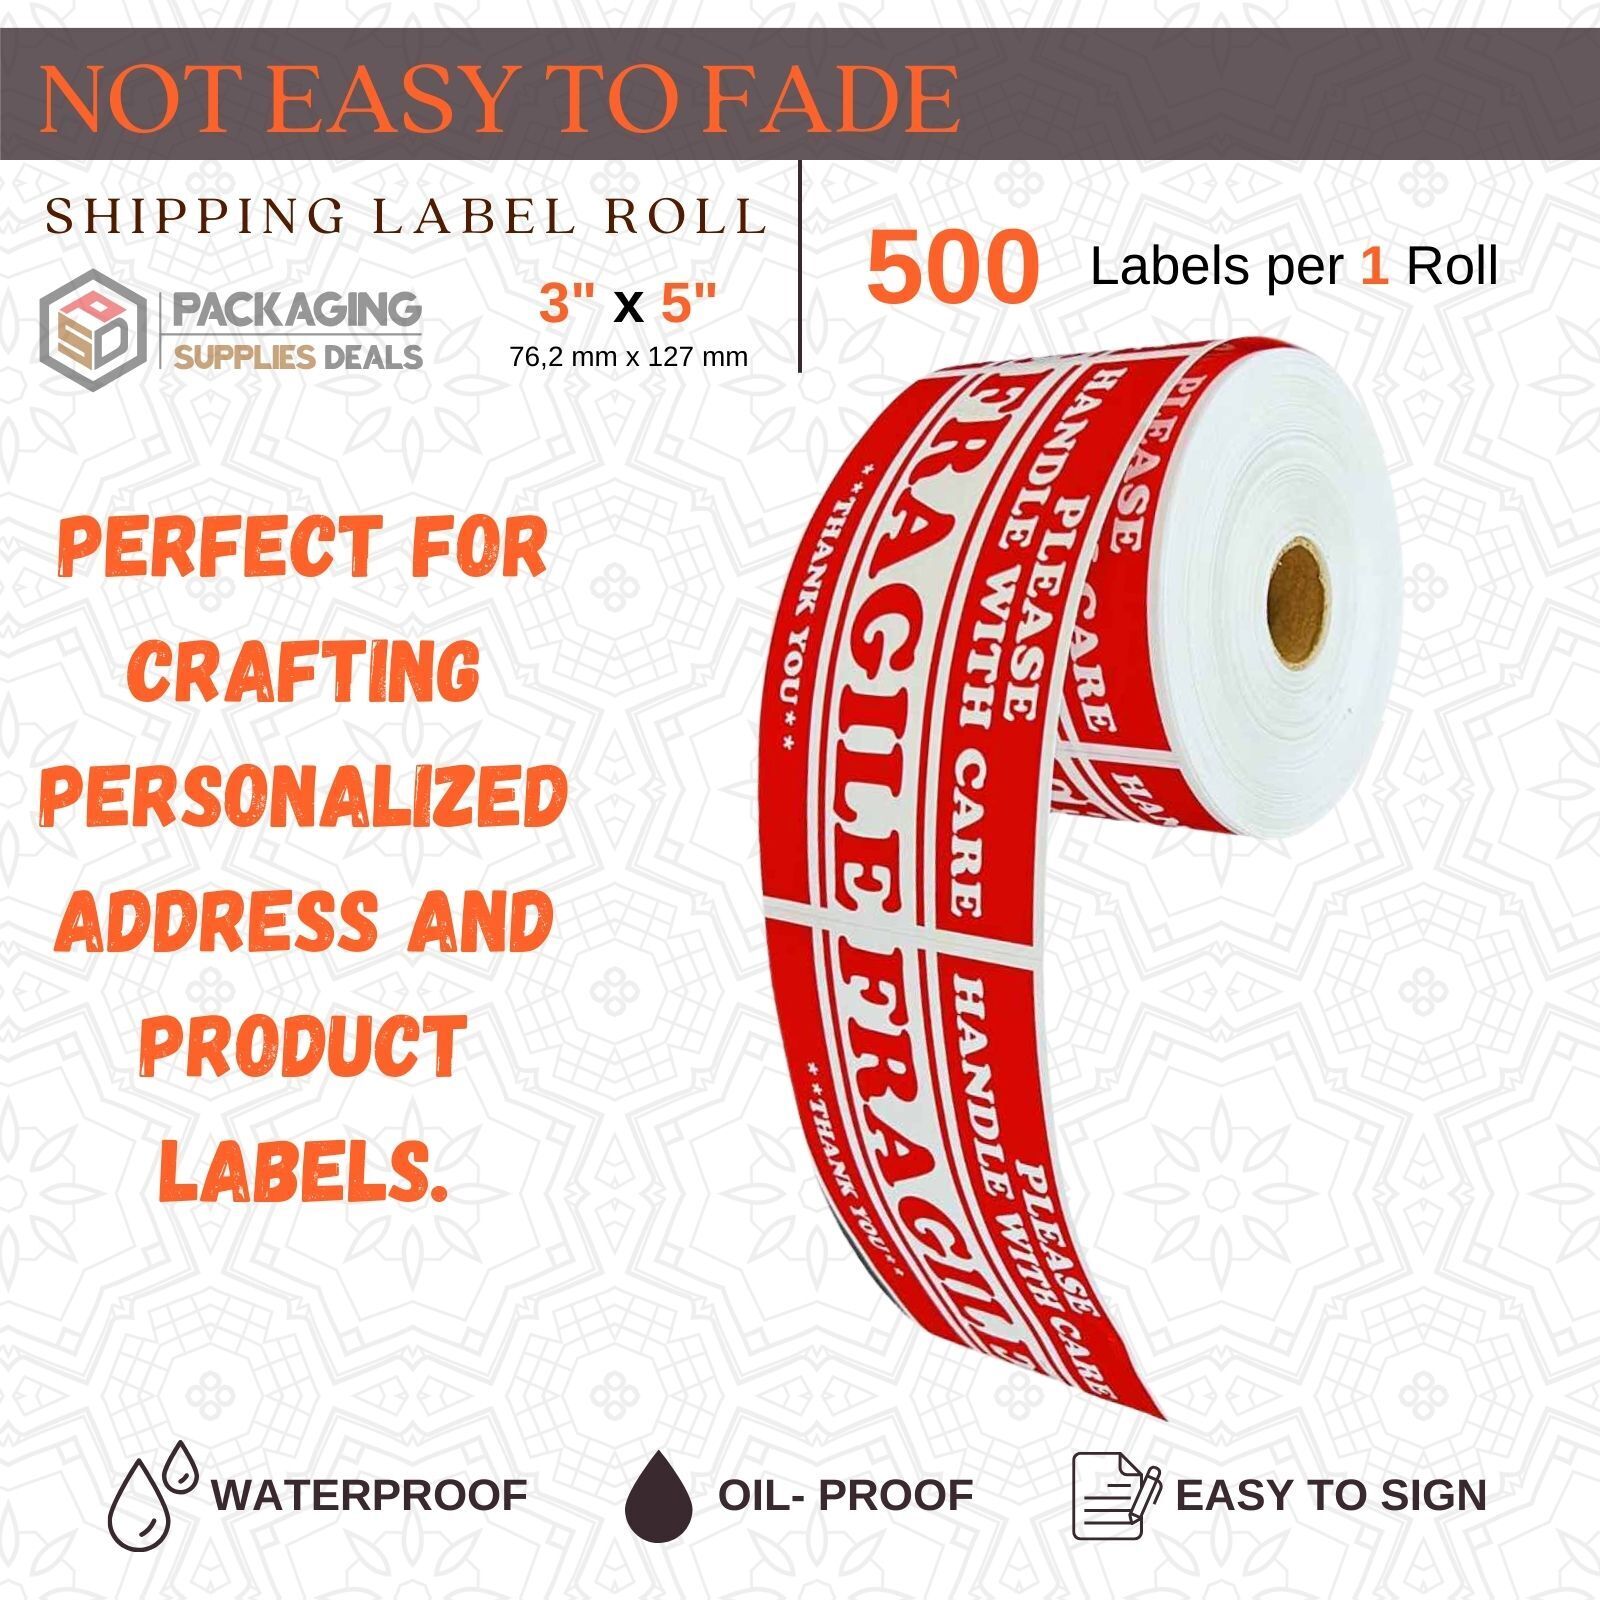 Specialty Shipping Labels - Choose Your - Rolls Packaging Supplies Deals Shipping - фотография #3